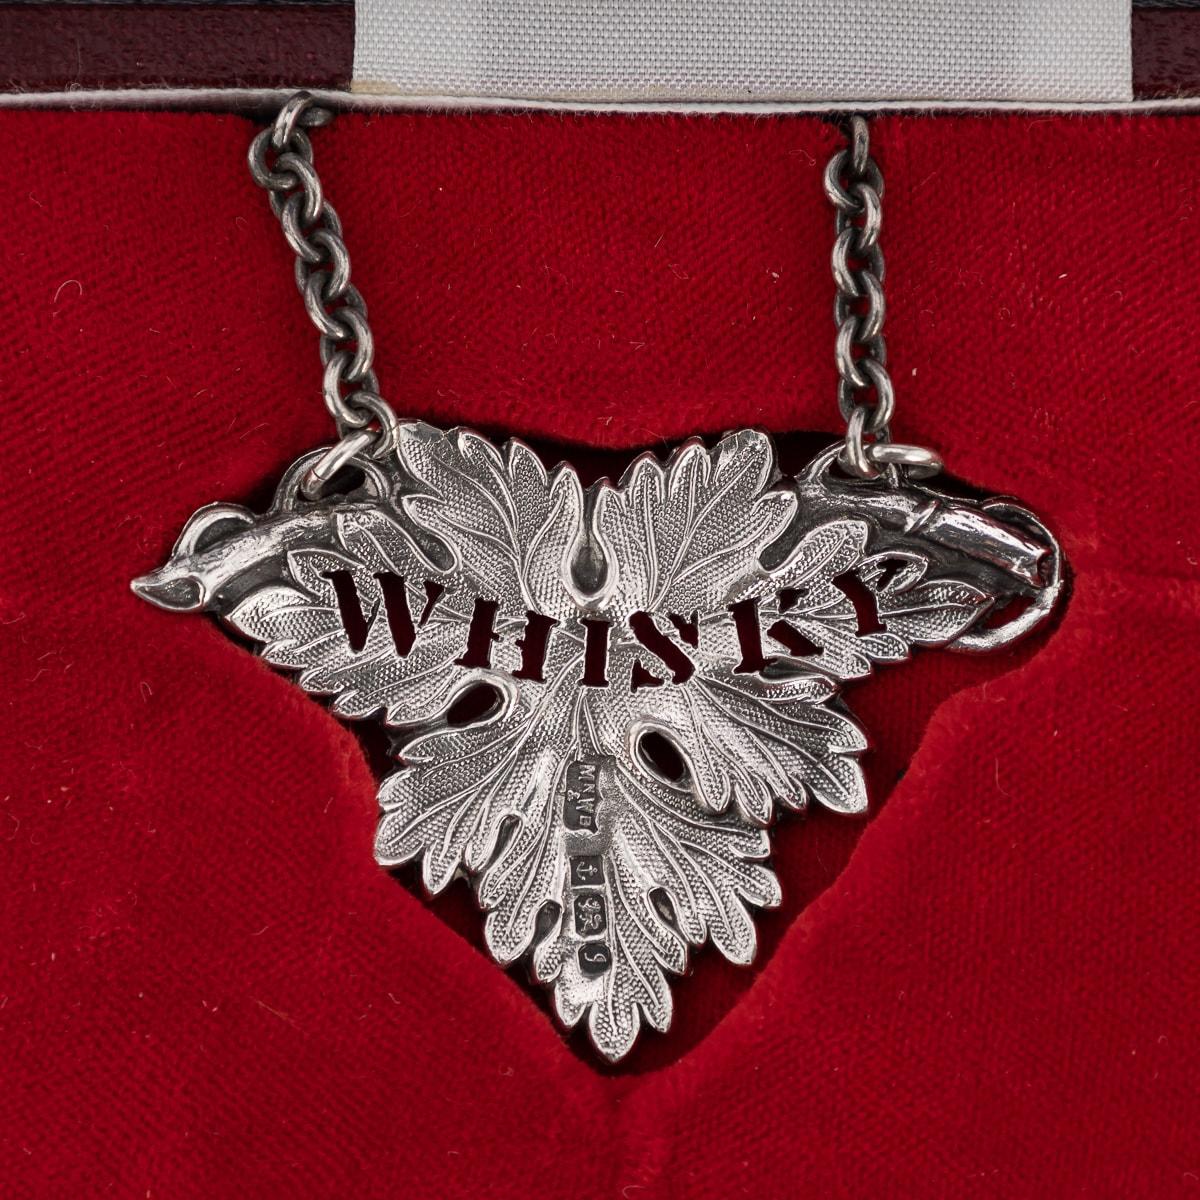 Late 20th Century set of five solid silver spirit labels, each beautifully modelled and chased imitating a wine leaf and pierced to spell out the drink of choice, suspended on a silver chain, presented in the original retail box. Each label is